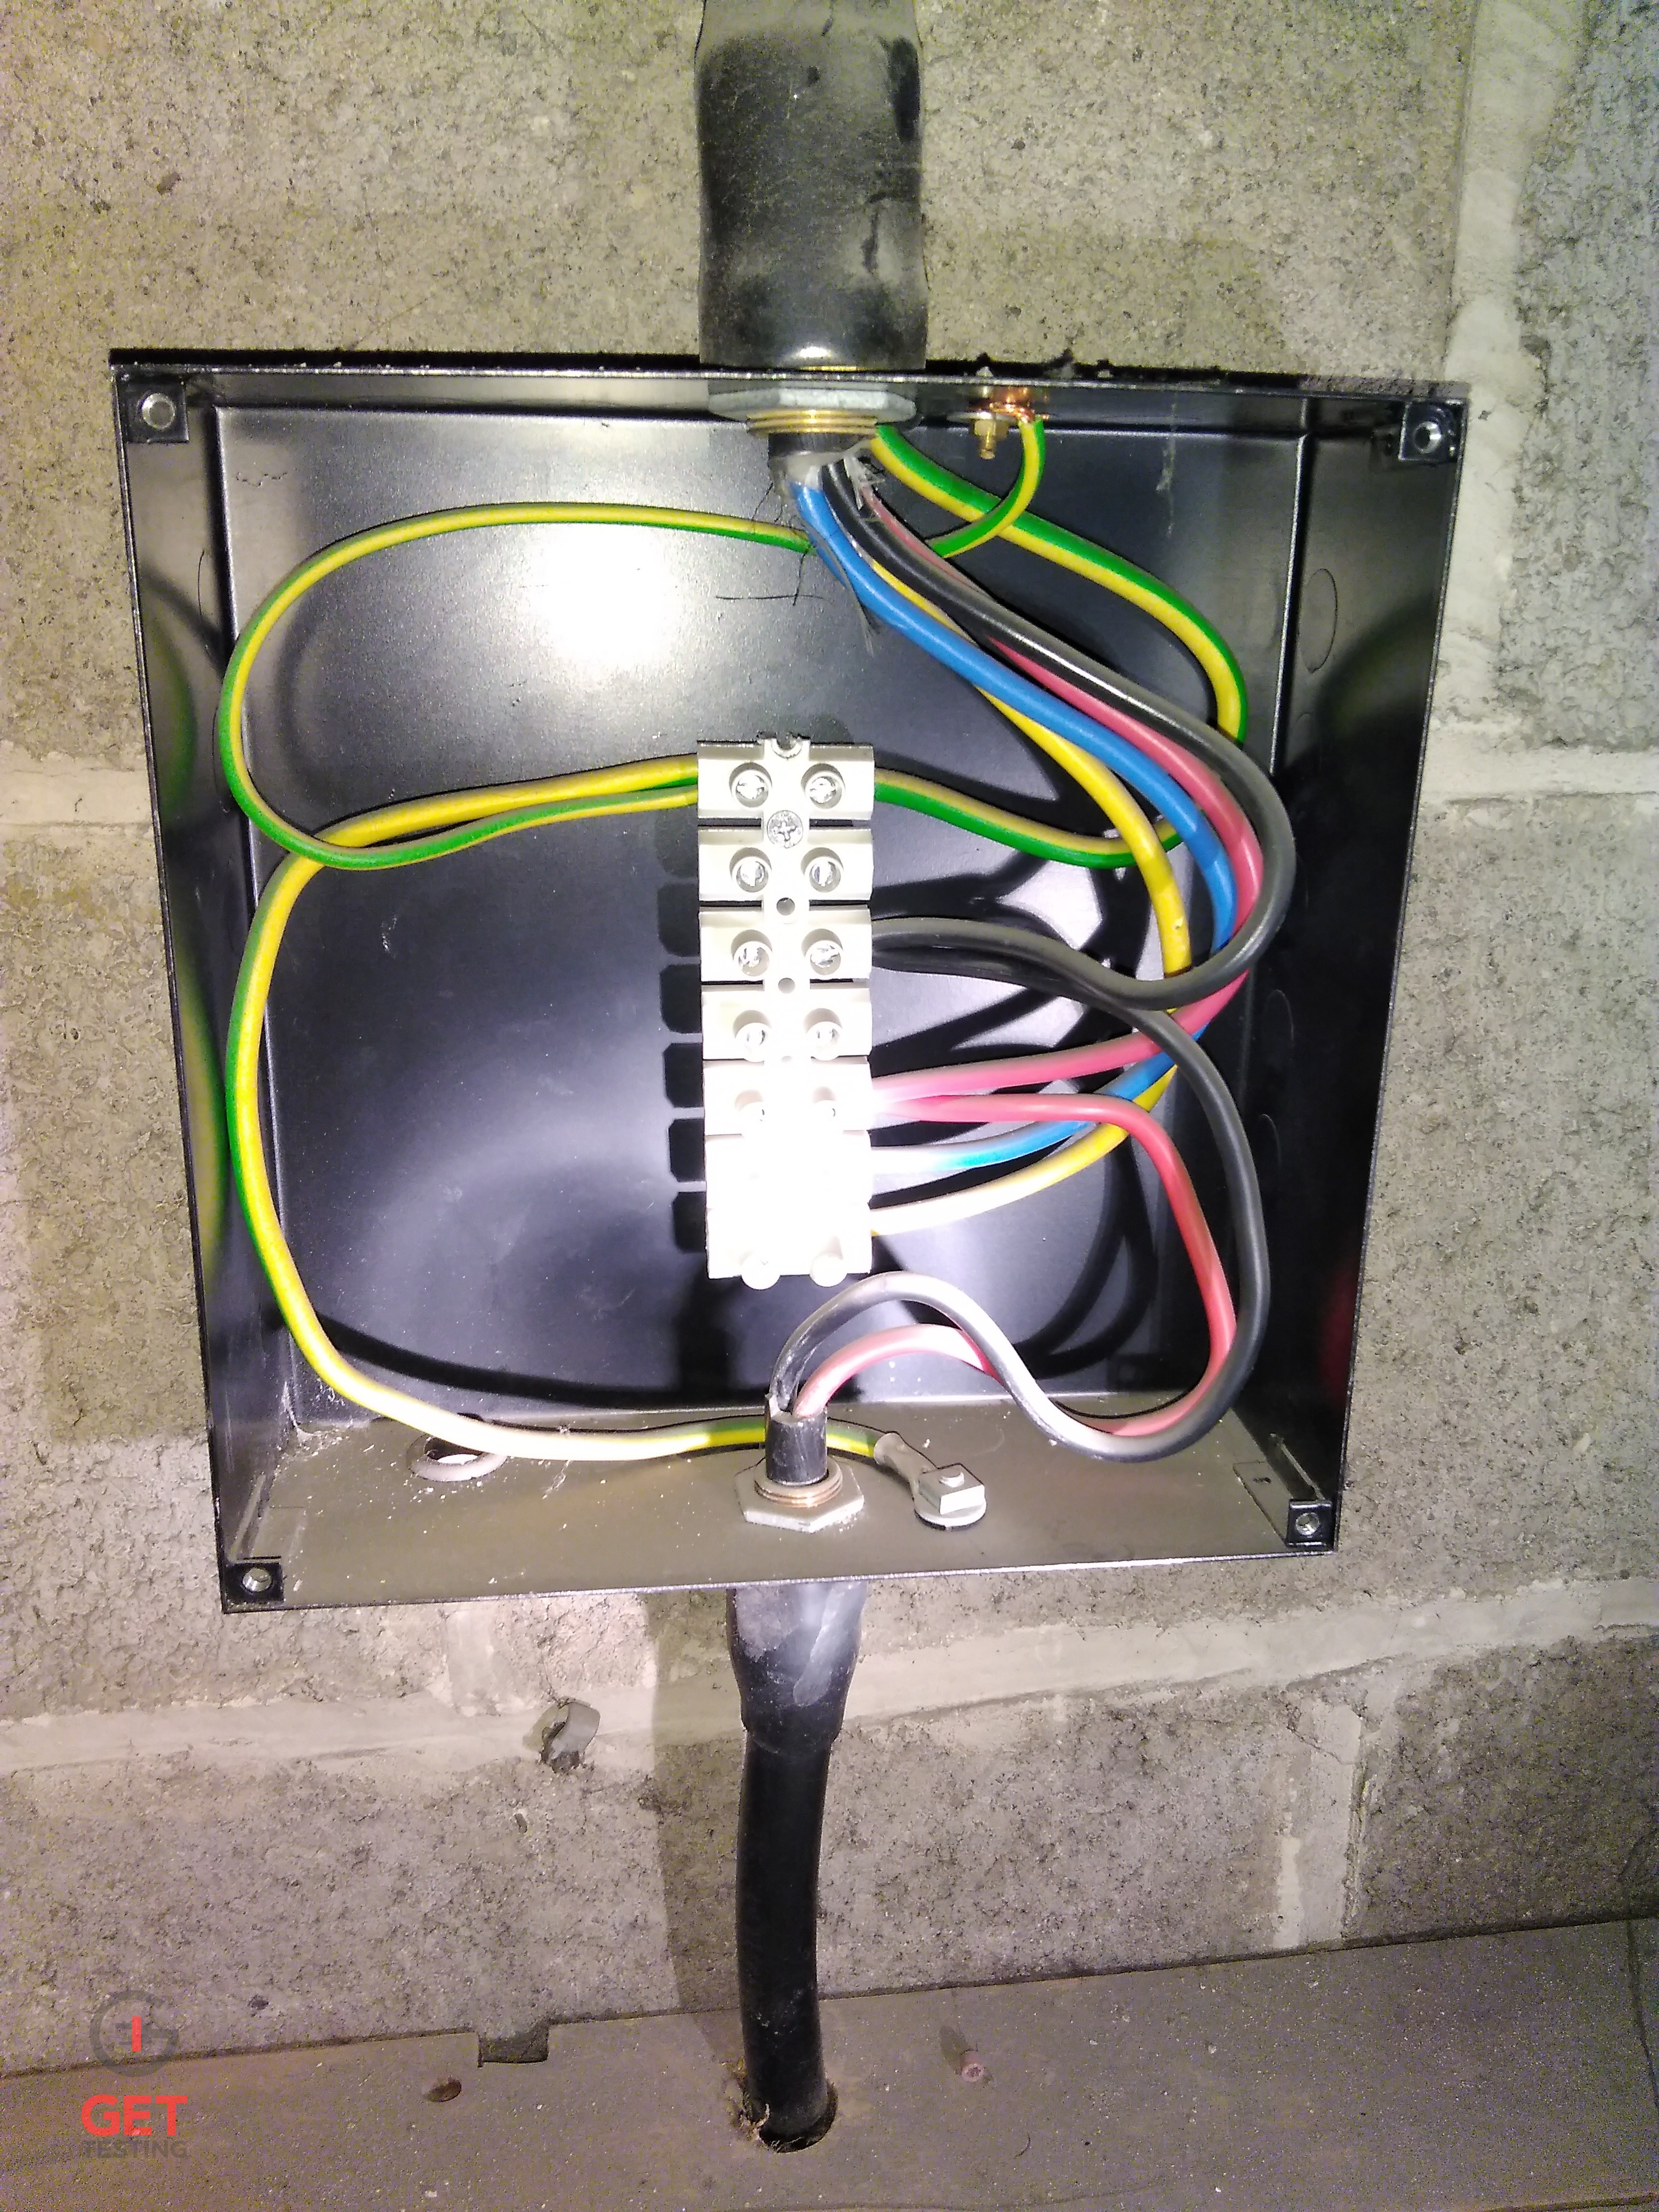 Electrical enclosure with missing lid and live electrical parts